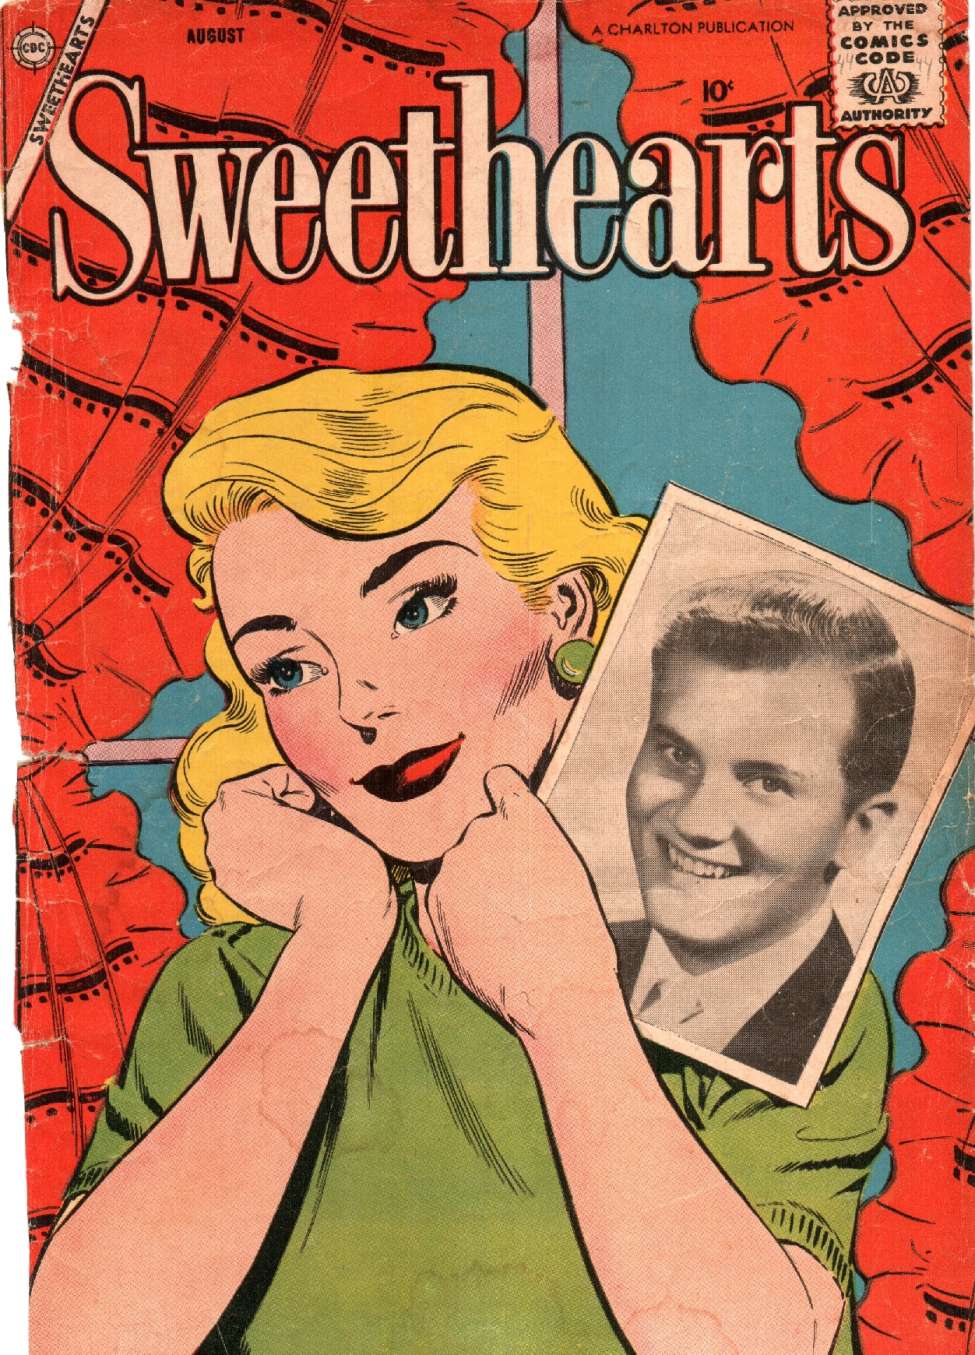 Book Cover For Sweethearts 44 (damaged) - Version 2